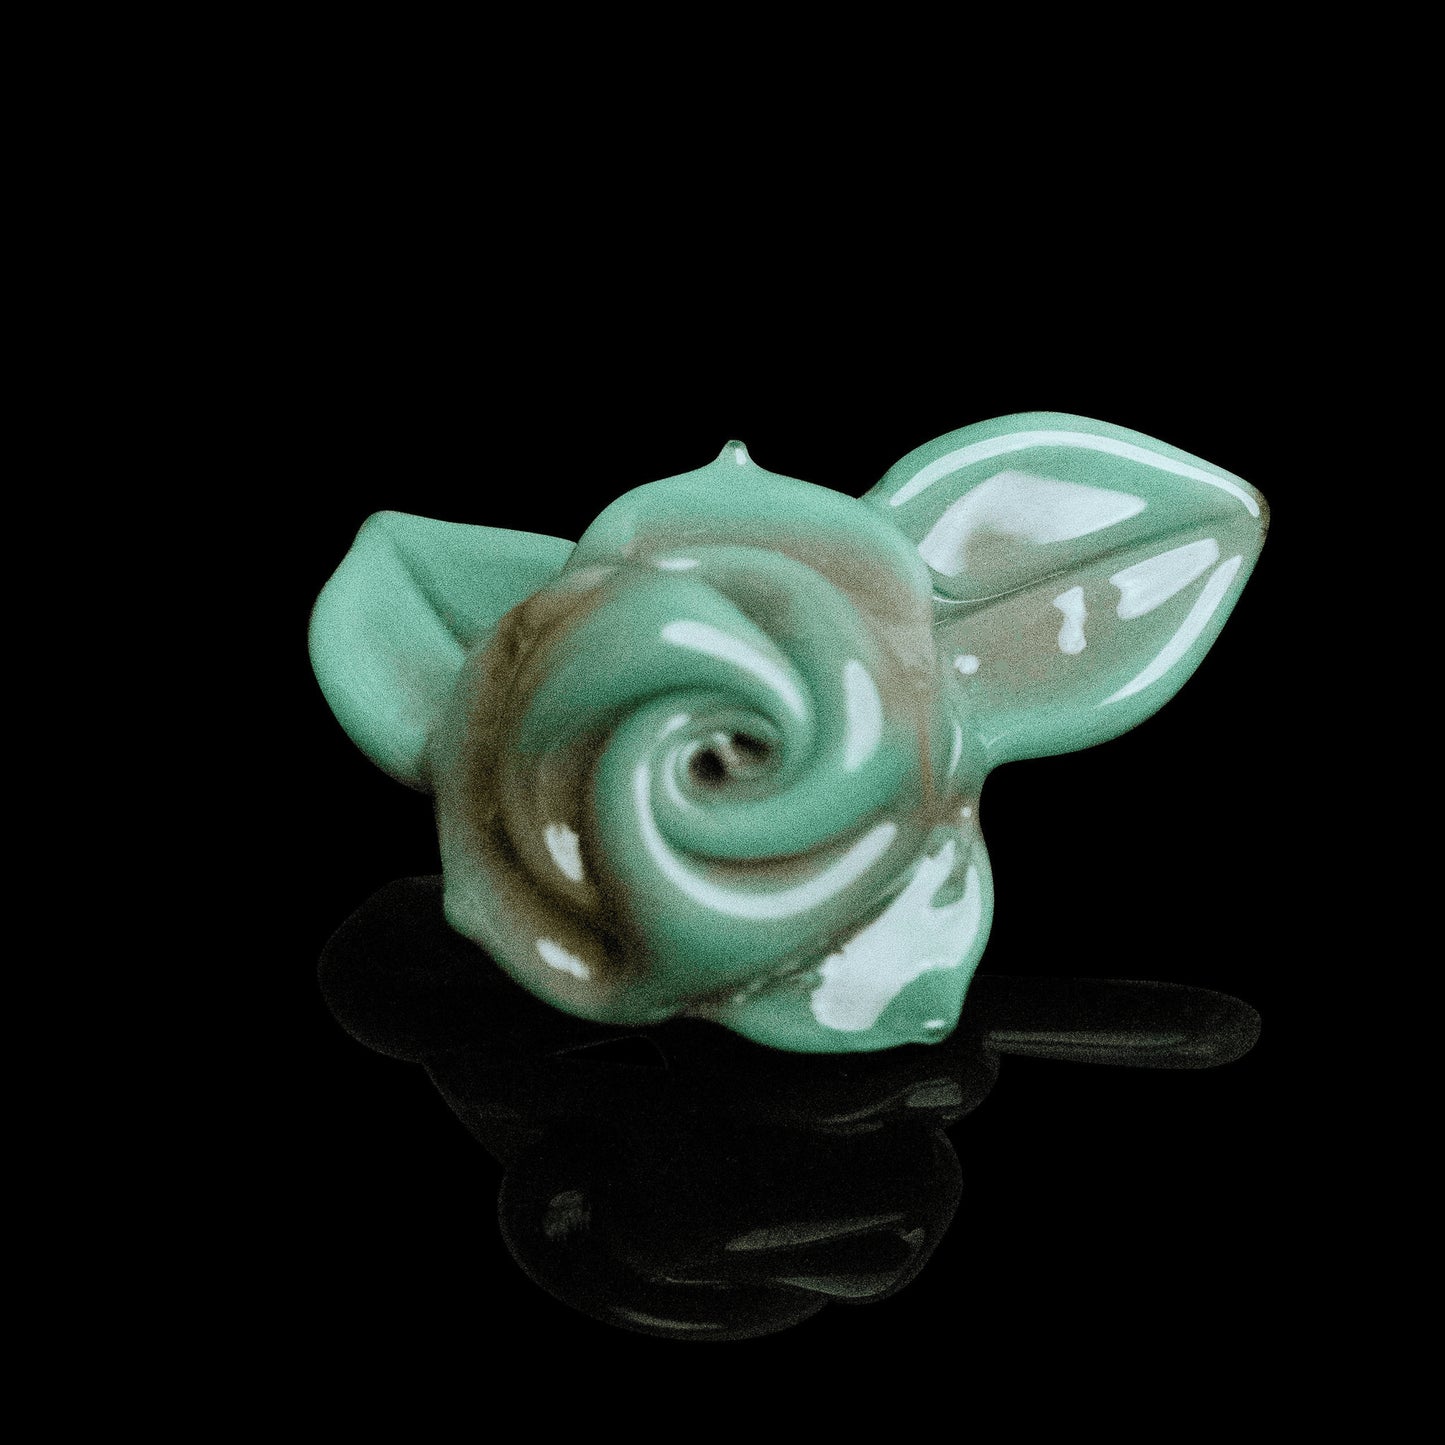 meticulously crafted glass pendant - Turquoise Rose Pendant (A) by Sakibomb (2021)